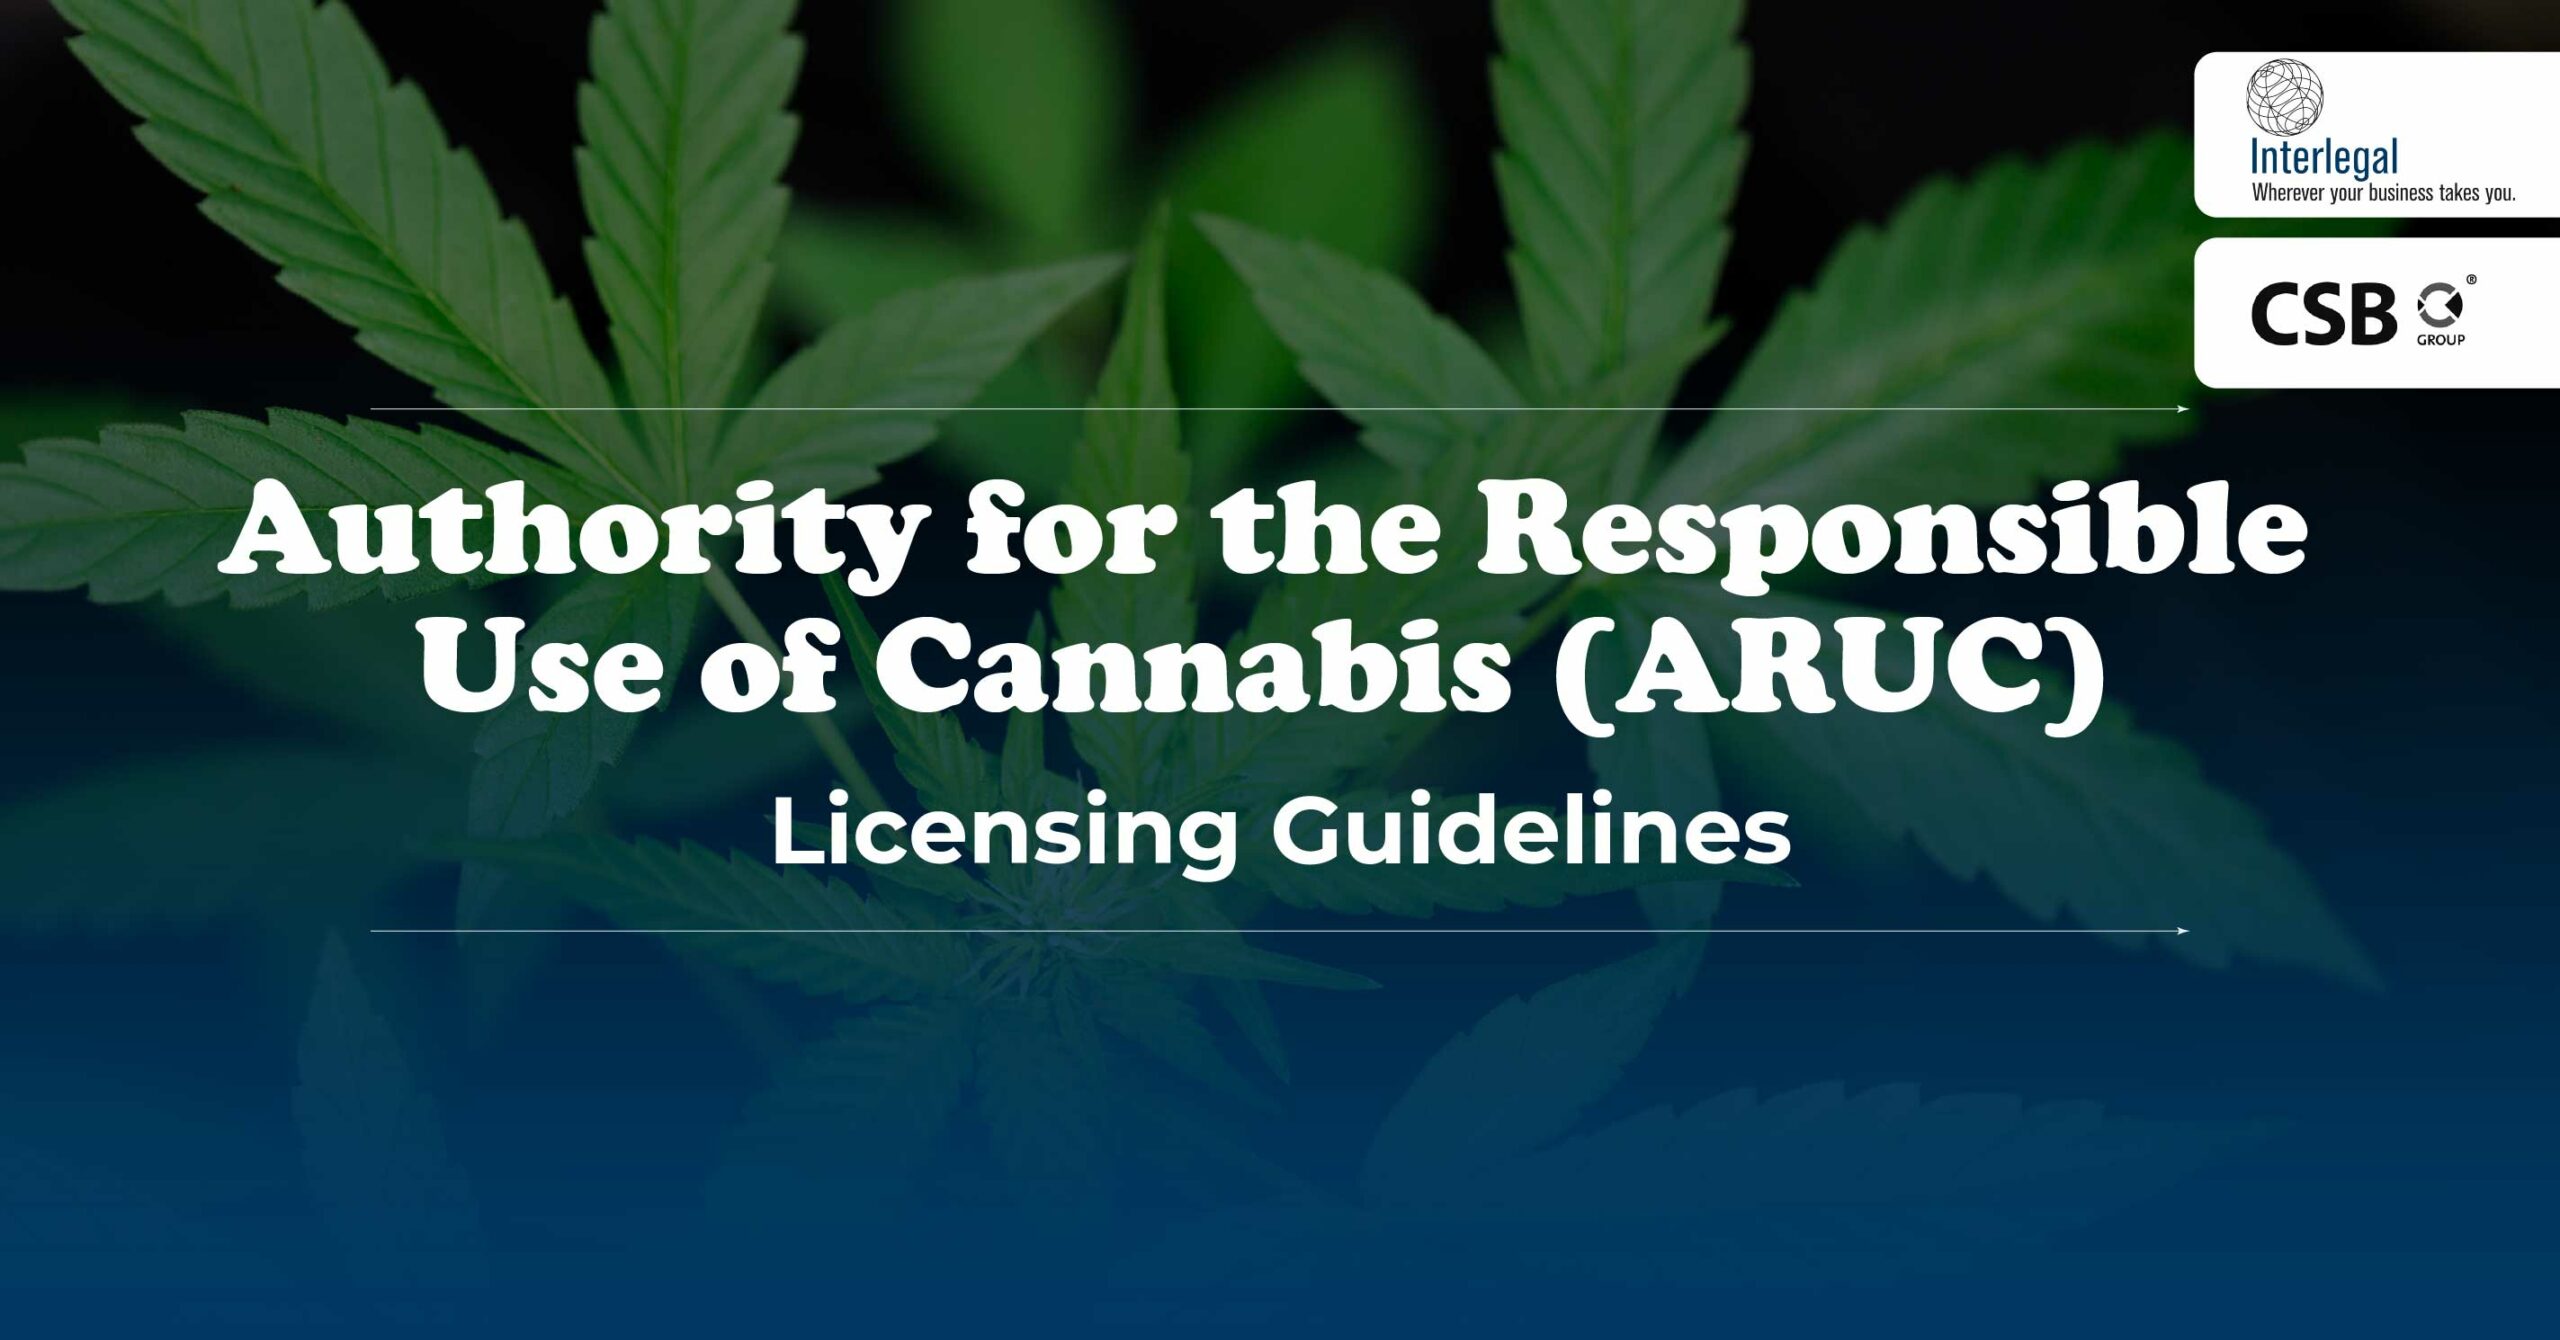 Authority for the Responsible Use of Cannabis (“ARUC”) Licensing Guidelines